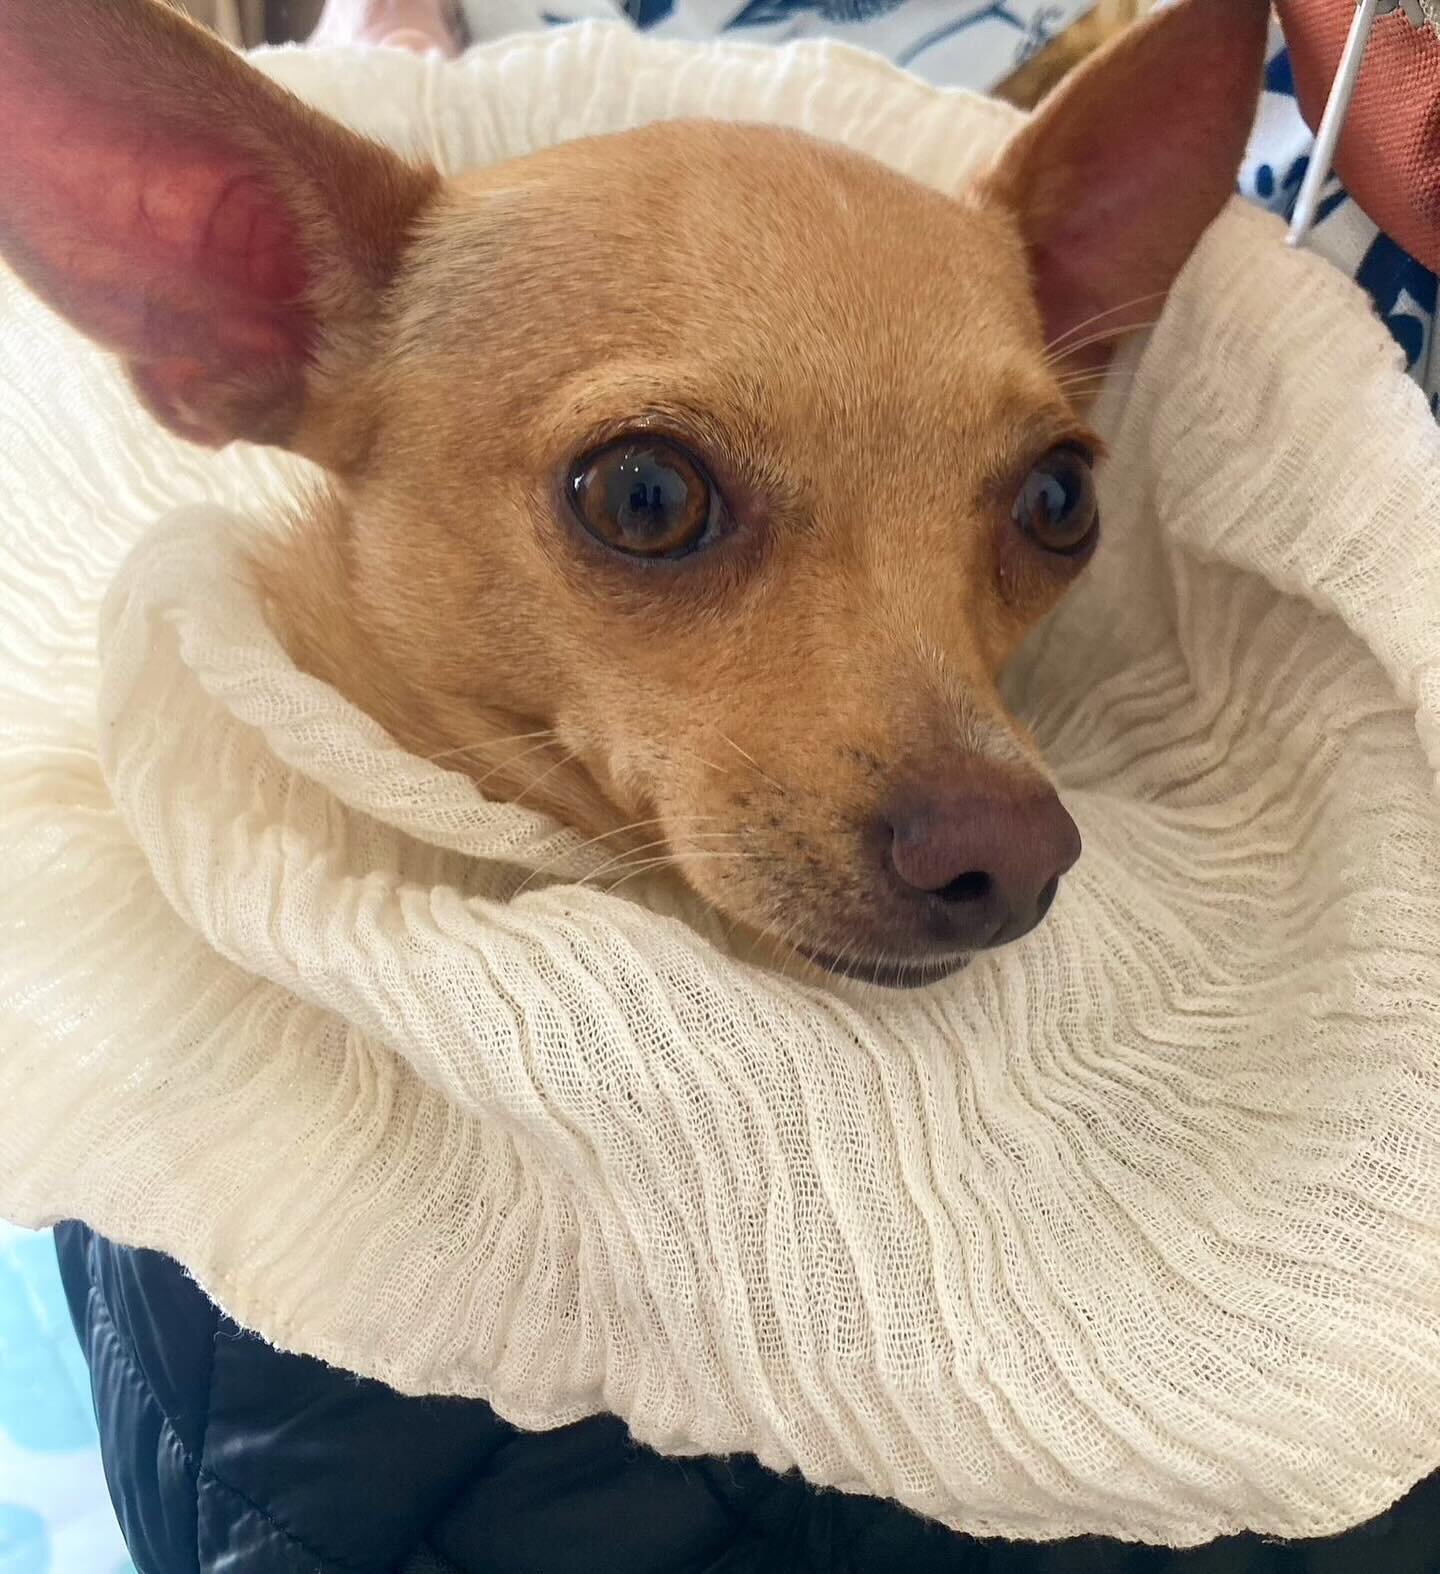 Tehuana Shakespeare Mexchica chihuahuawita &hearts;️🔥&hearts;️ aka moda de scrunchie plisada 🔥

Pleated cotton gauze scrunchie repurposed 🍩 

If your baby doggie needs one DM me I&rsquo;m happy to help make this a thing